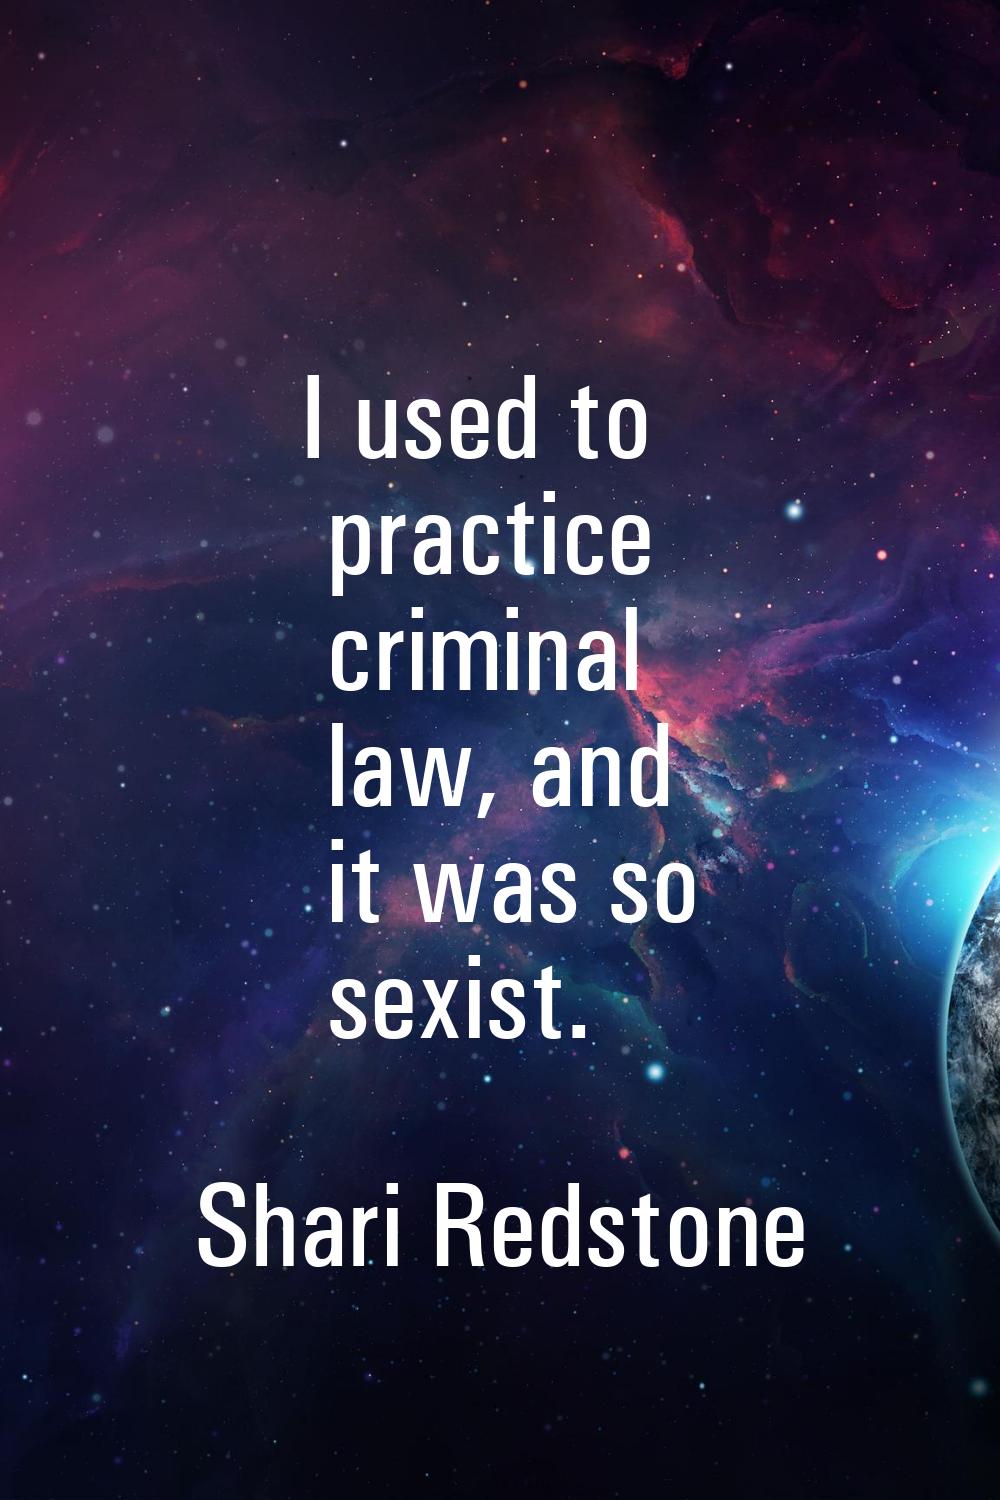 I used to practice criminal law, and it was so sexist.